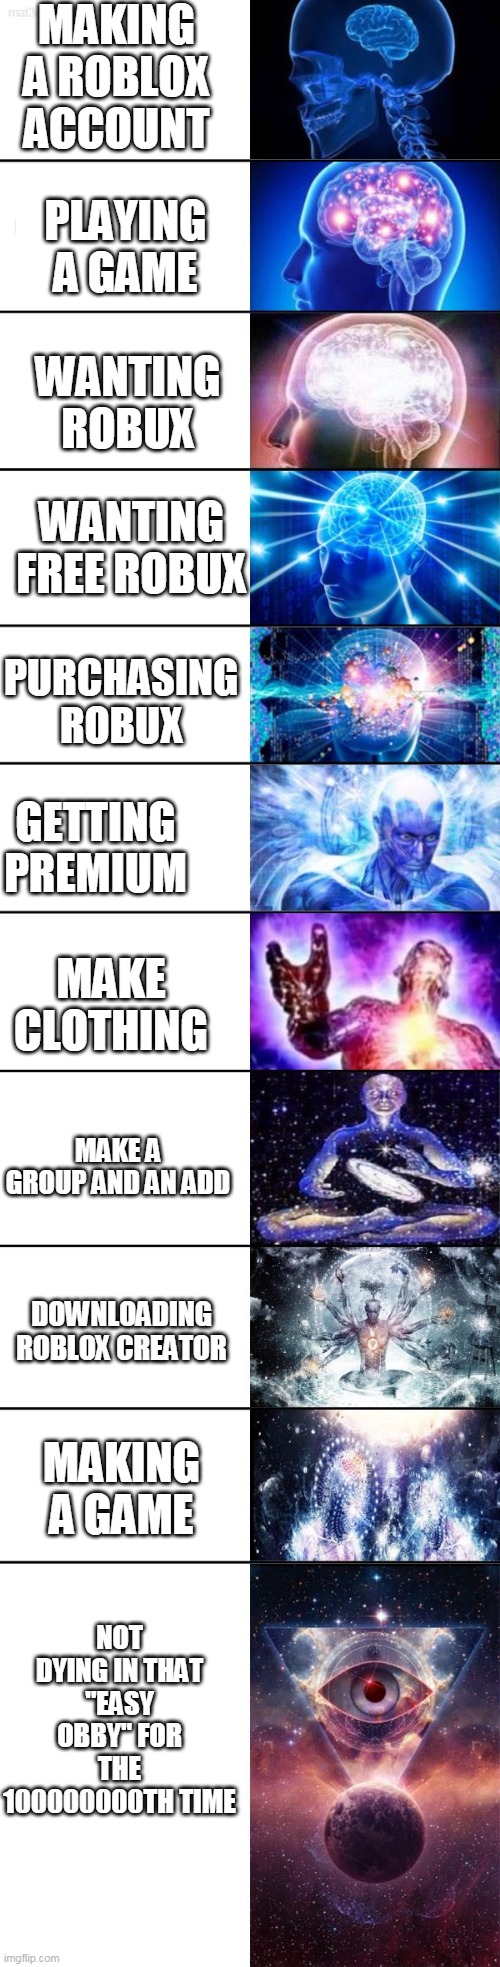 Extended Expanding Brain | MAKING A ROBLOX ACCOUNT; PLAYING A GAME; WANTING ROBUX; WANTING FREE ROBUX; PURCHASING ROBUX; GETTING PREMIUM; MAKE CLOTHING; MAKE A GROUP AND AN ADD; DOWNLOADING ROBLOX CREATOR; MAKING A GAME; NOT DYING IN THAT "EASY OBBY" FOR THE 100000000TH TIME | image tagged in extended expanding brain | made w/ Imgflip meme maker